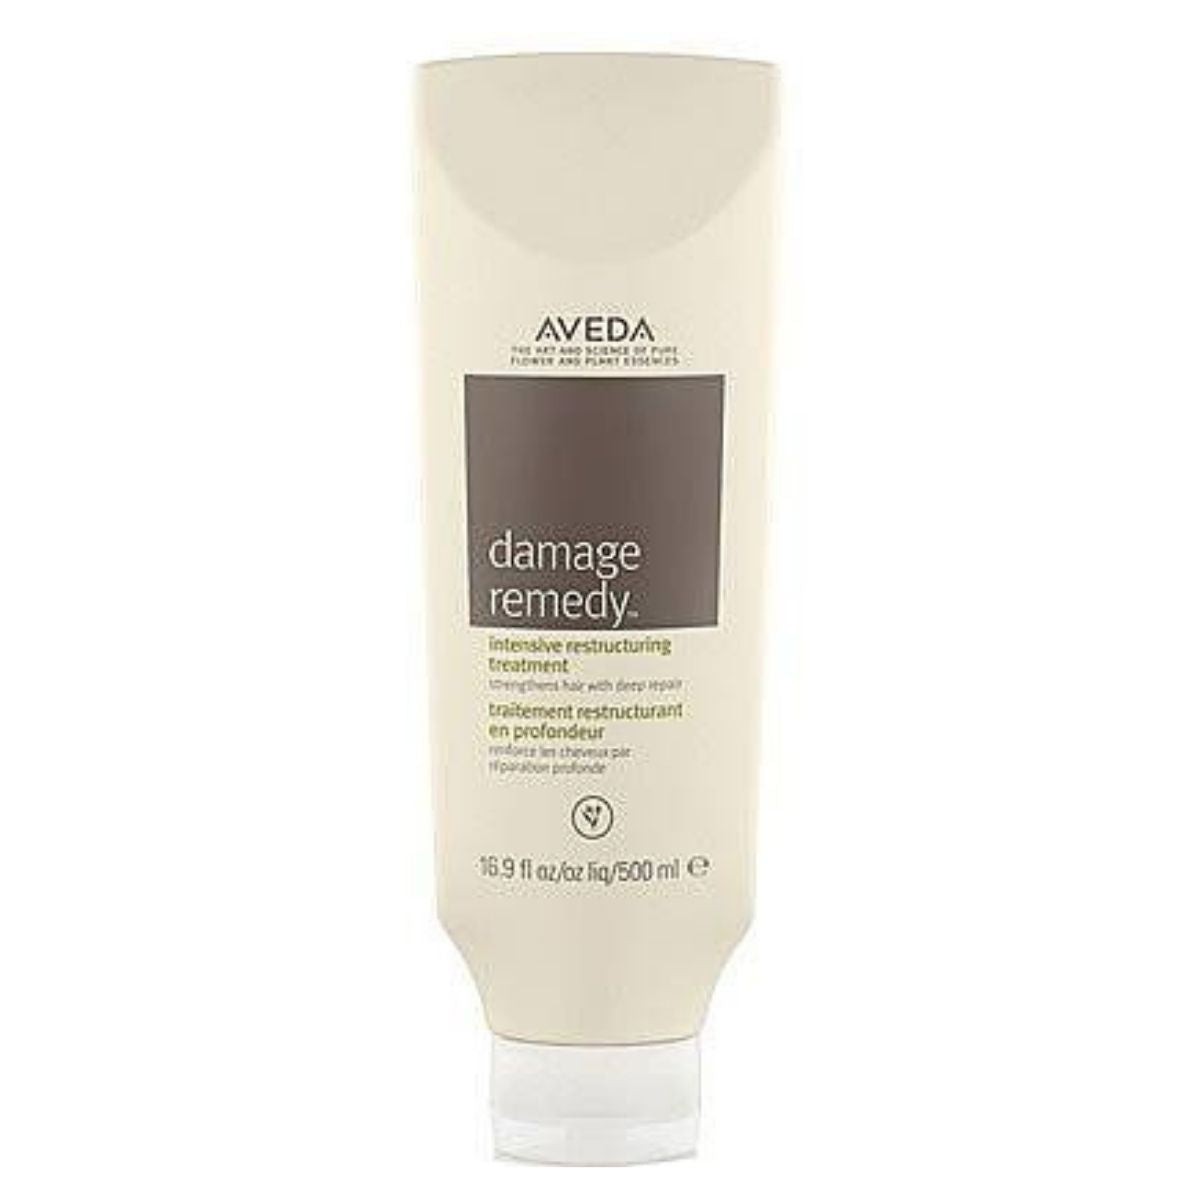 Aveda Damage Remedy Intensive Restructuring Treatment 500ml.